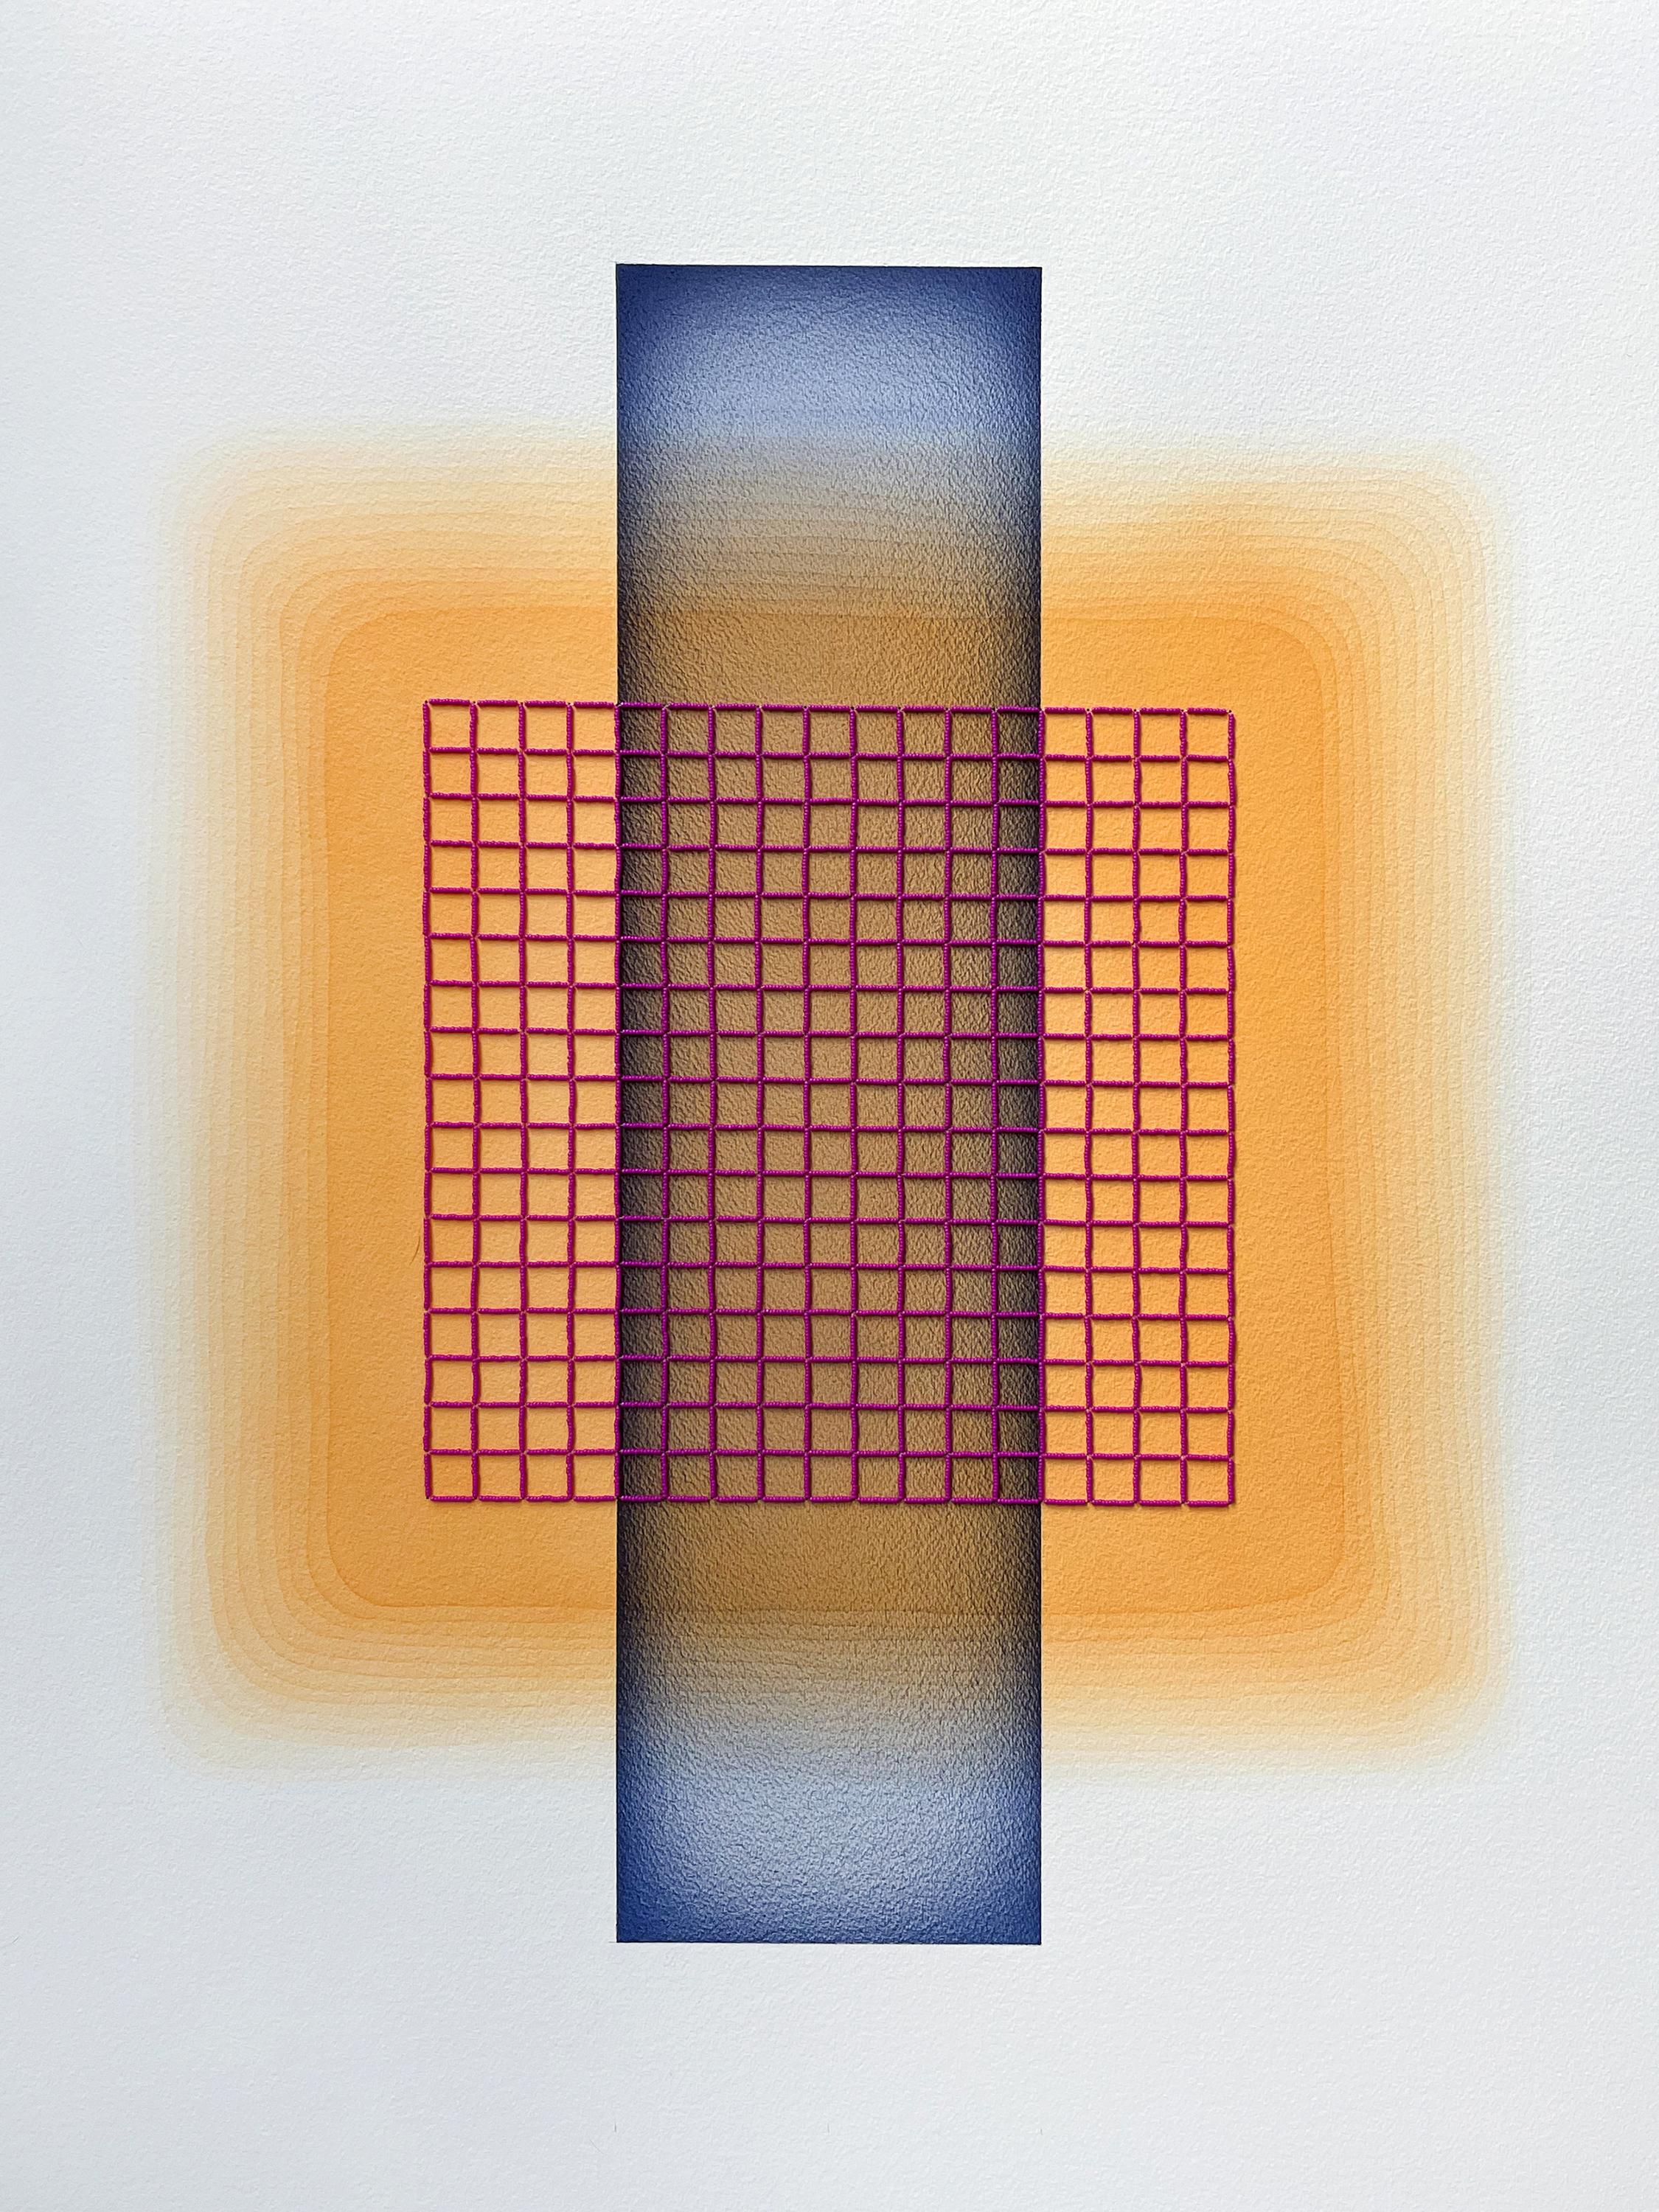 'Color Interaction IV (6)' - color theory, glass beads, bright, saturated, grid